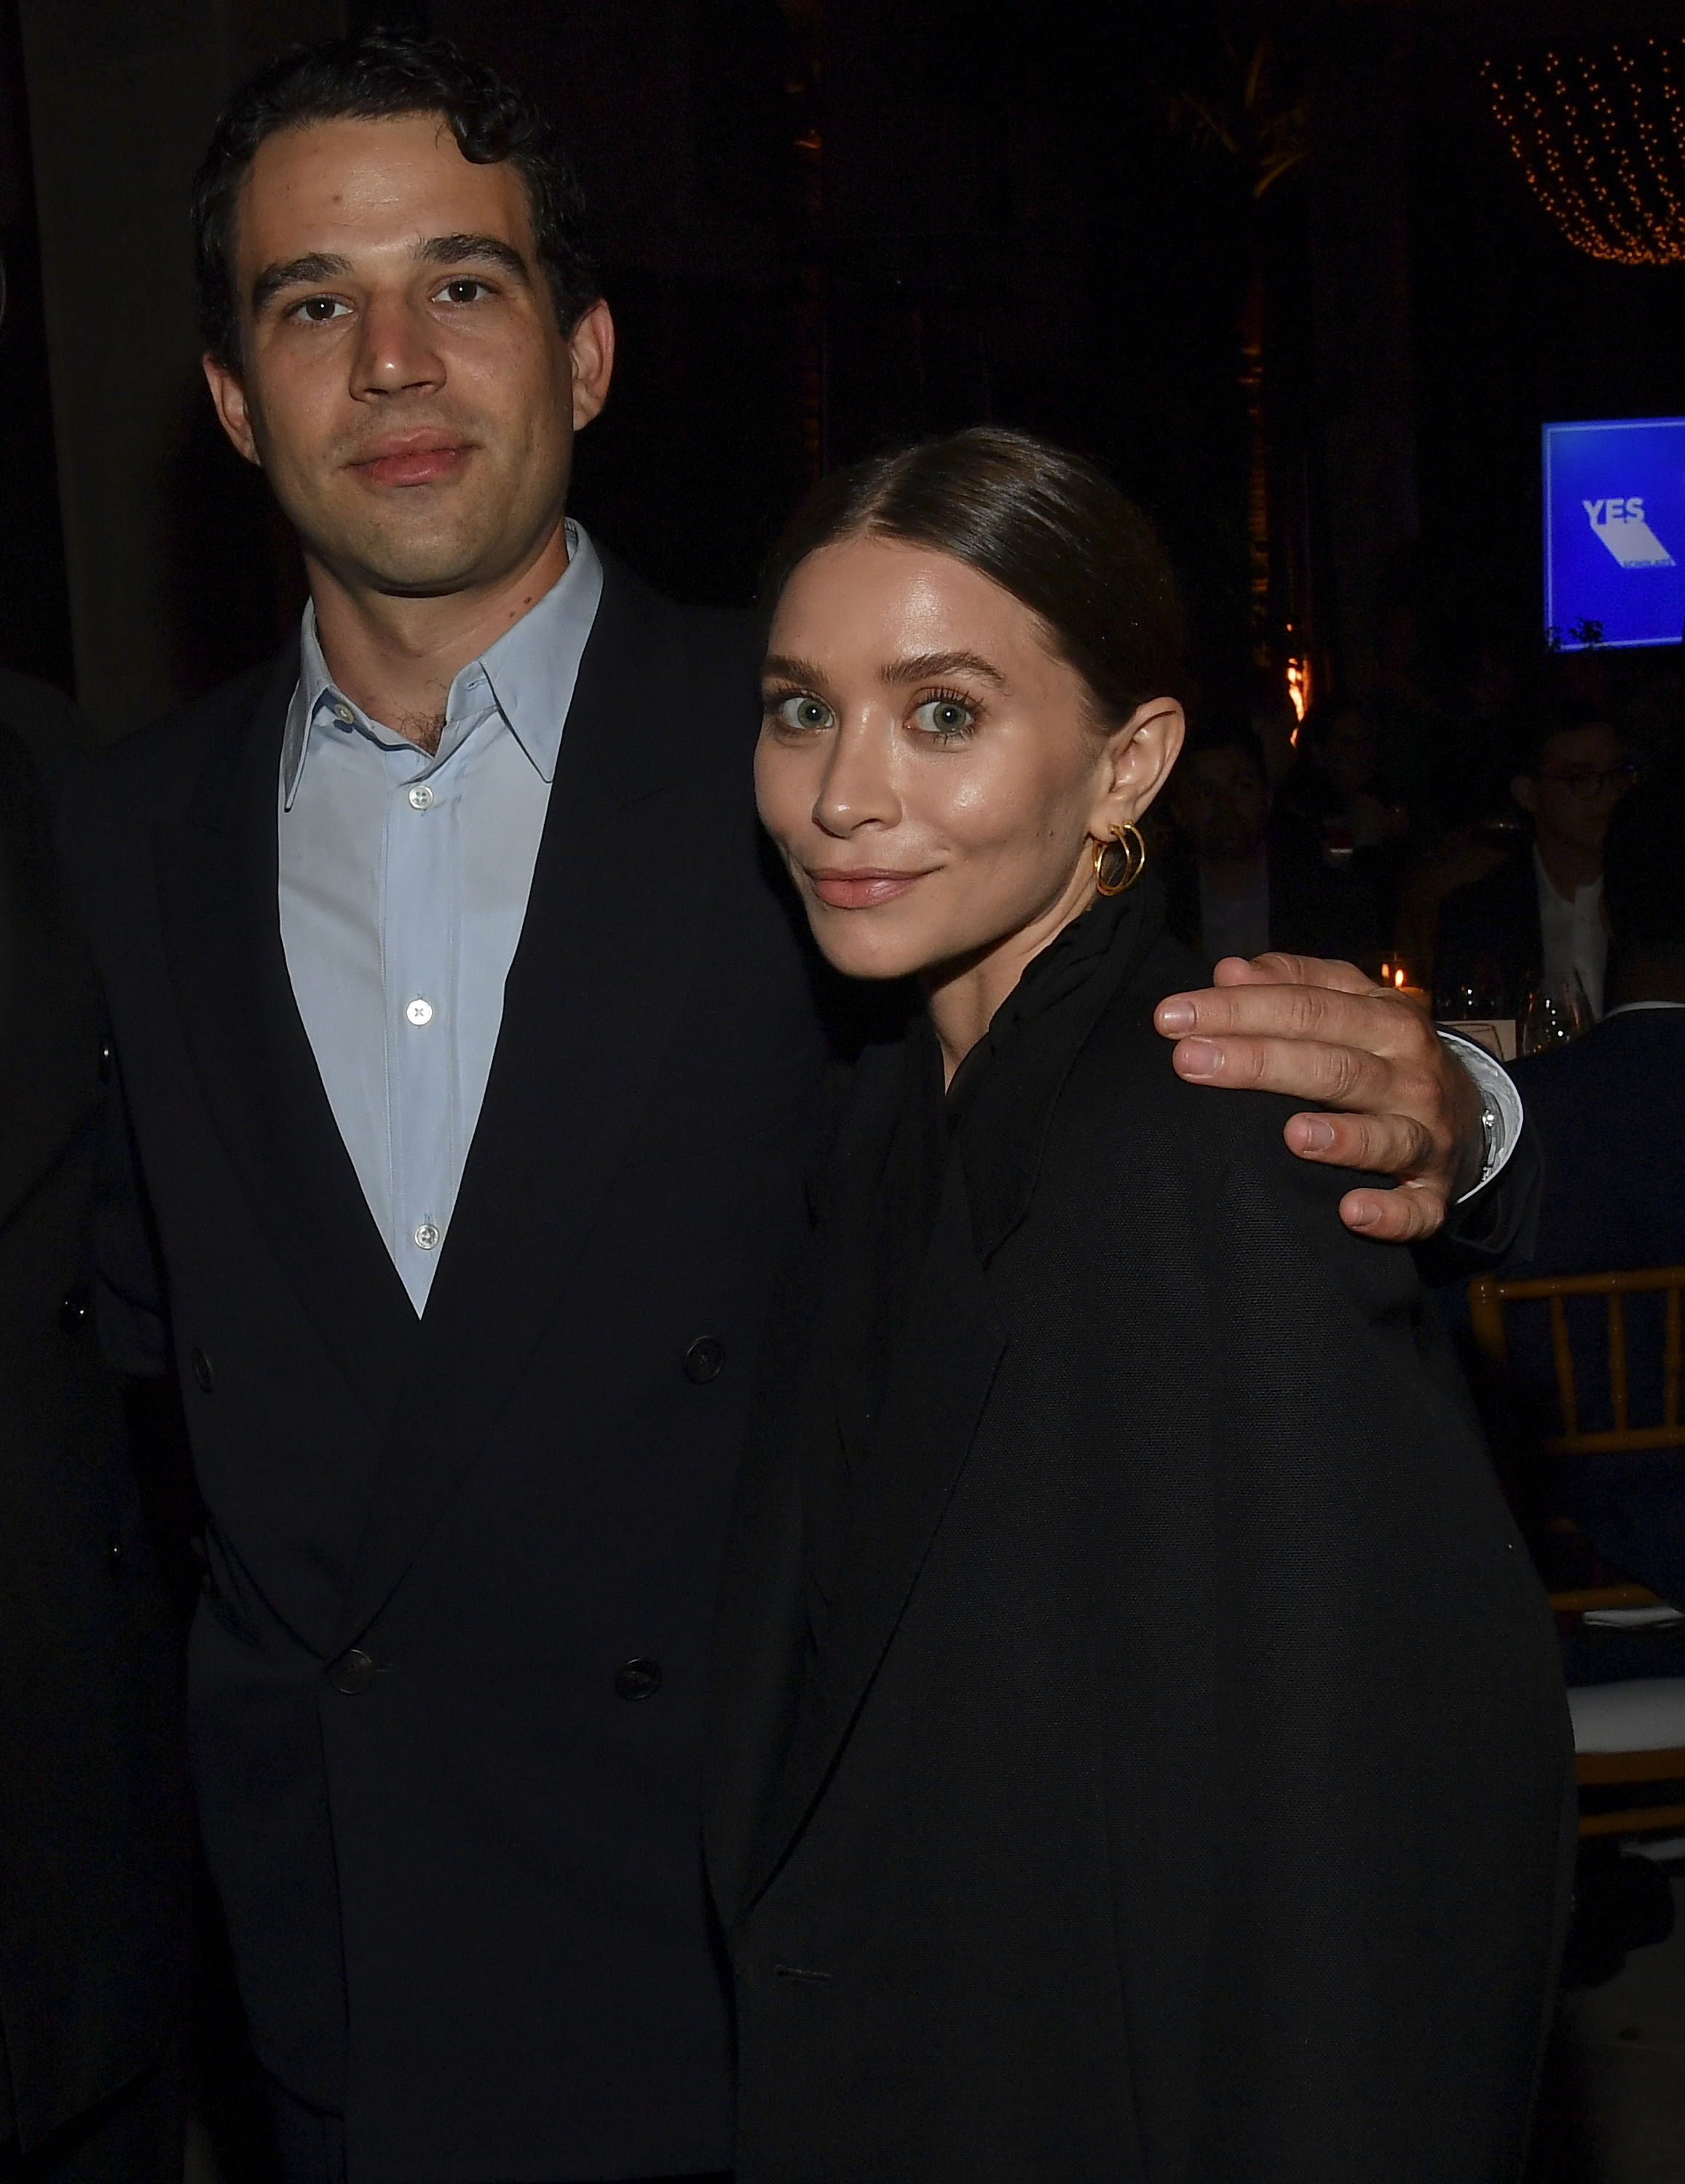 Louis Eisner and Ashley Olsen attend the YES 20th Anniversary Celebration in Beverly Hills, California on September 23, 2021. | Source: Getty Images